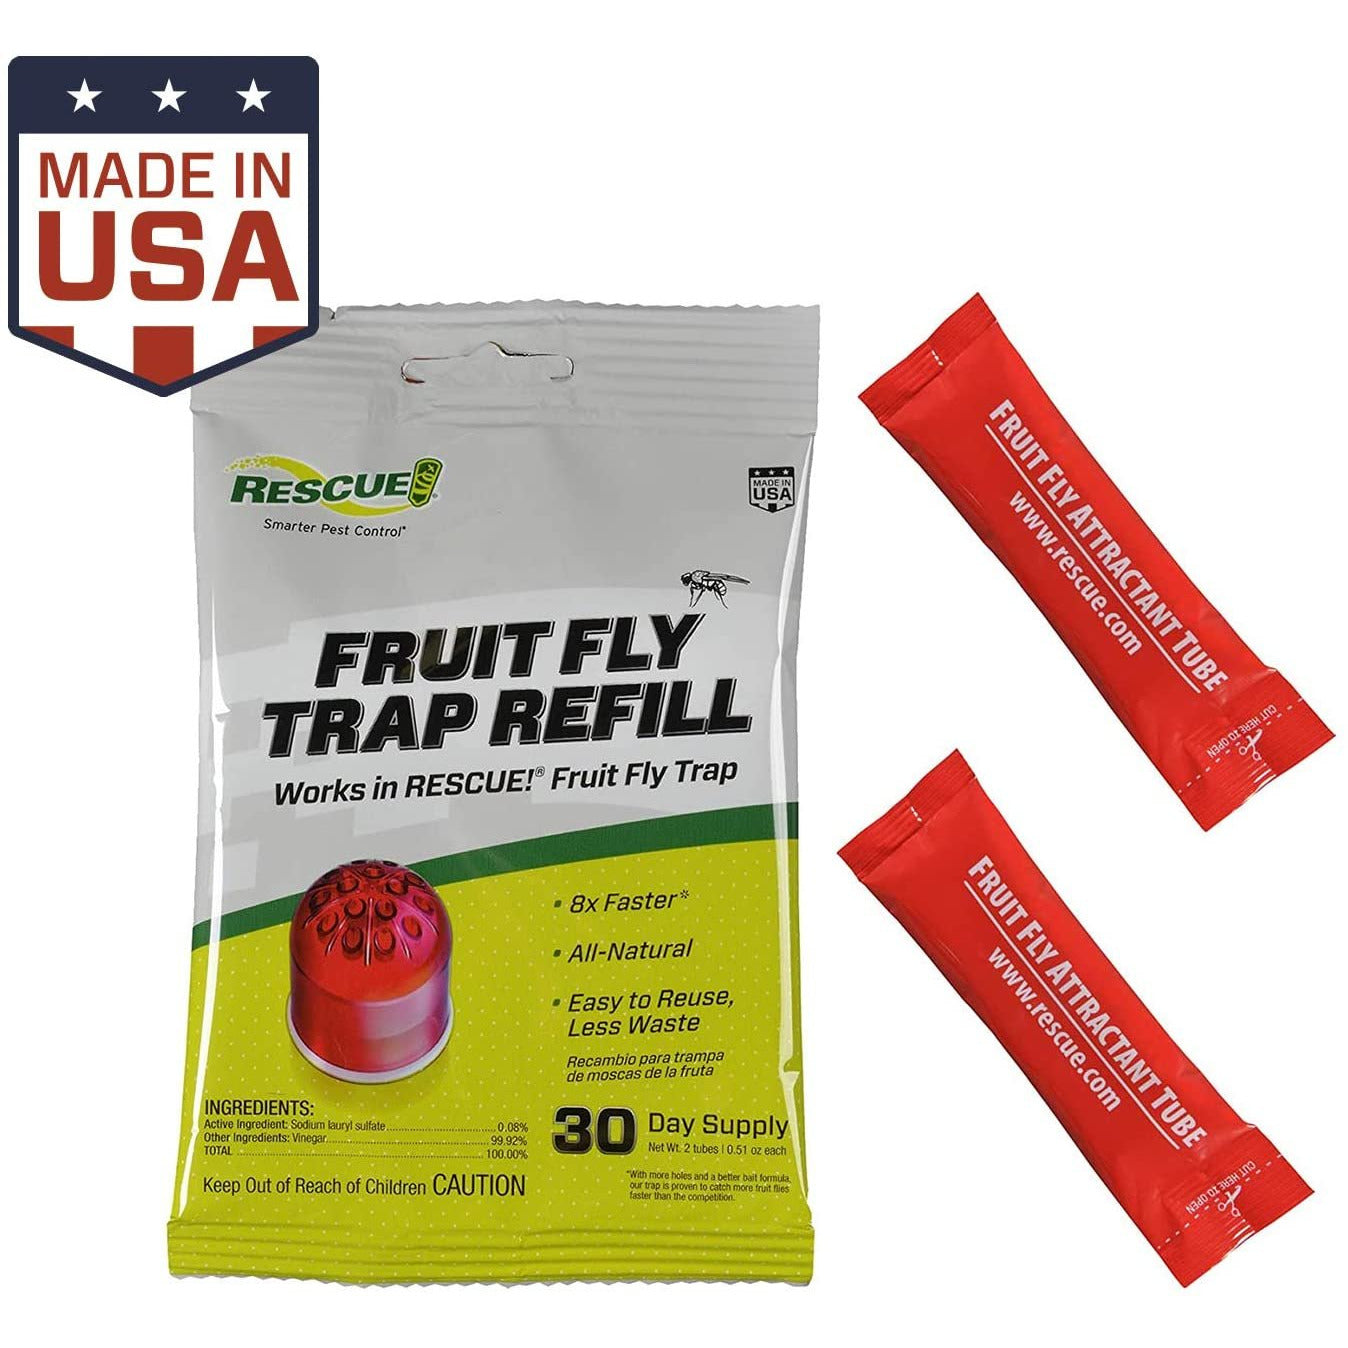 RESCUE! Fruit Fly Trap Attractant Refill – 30 Day Supply, Persik brand